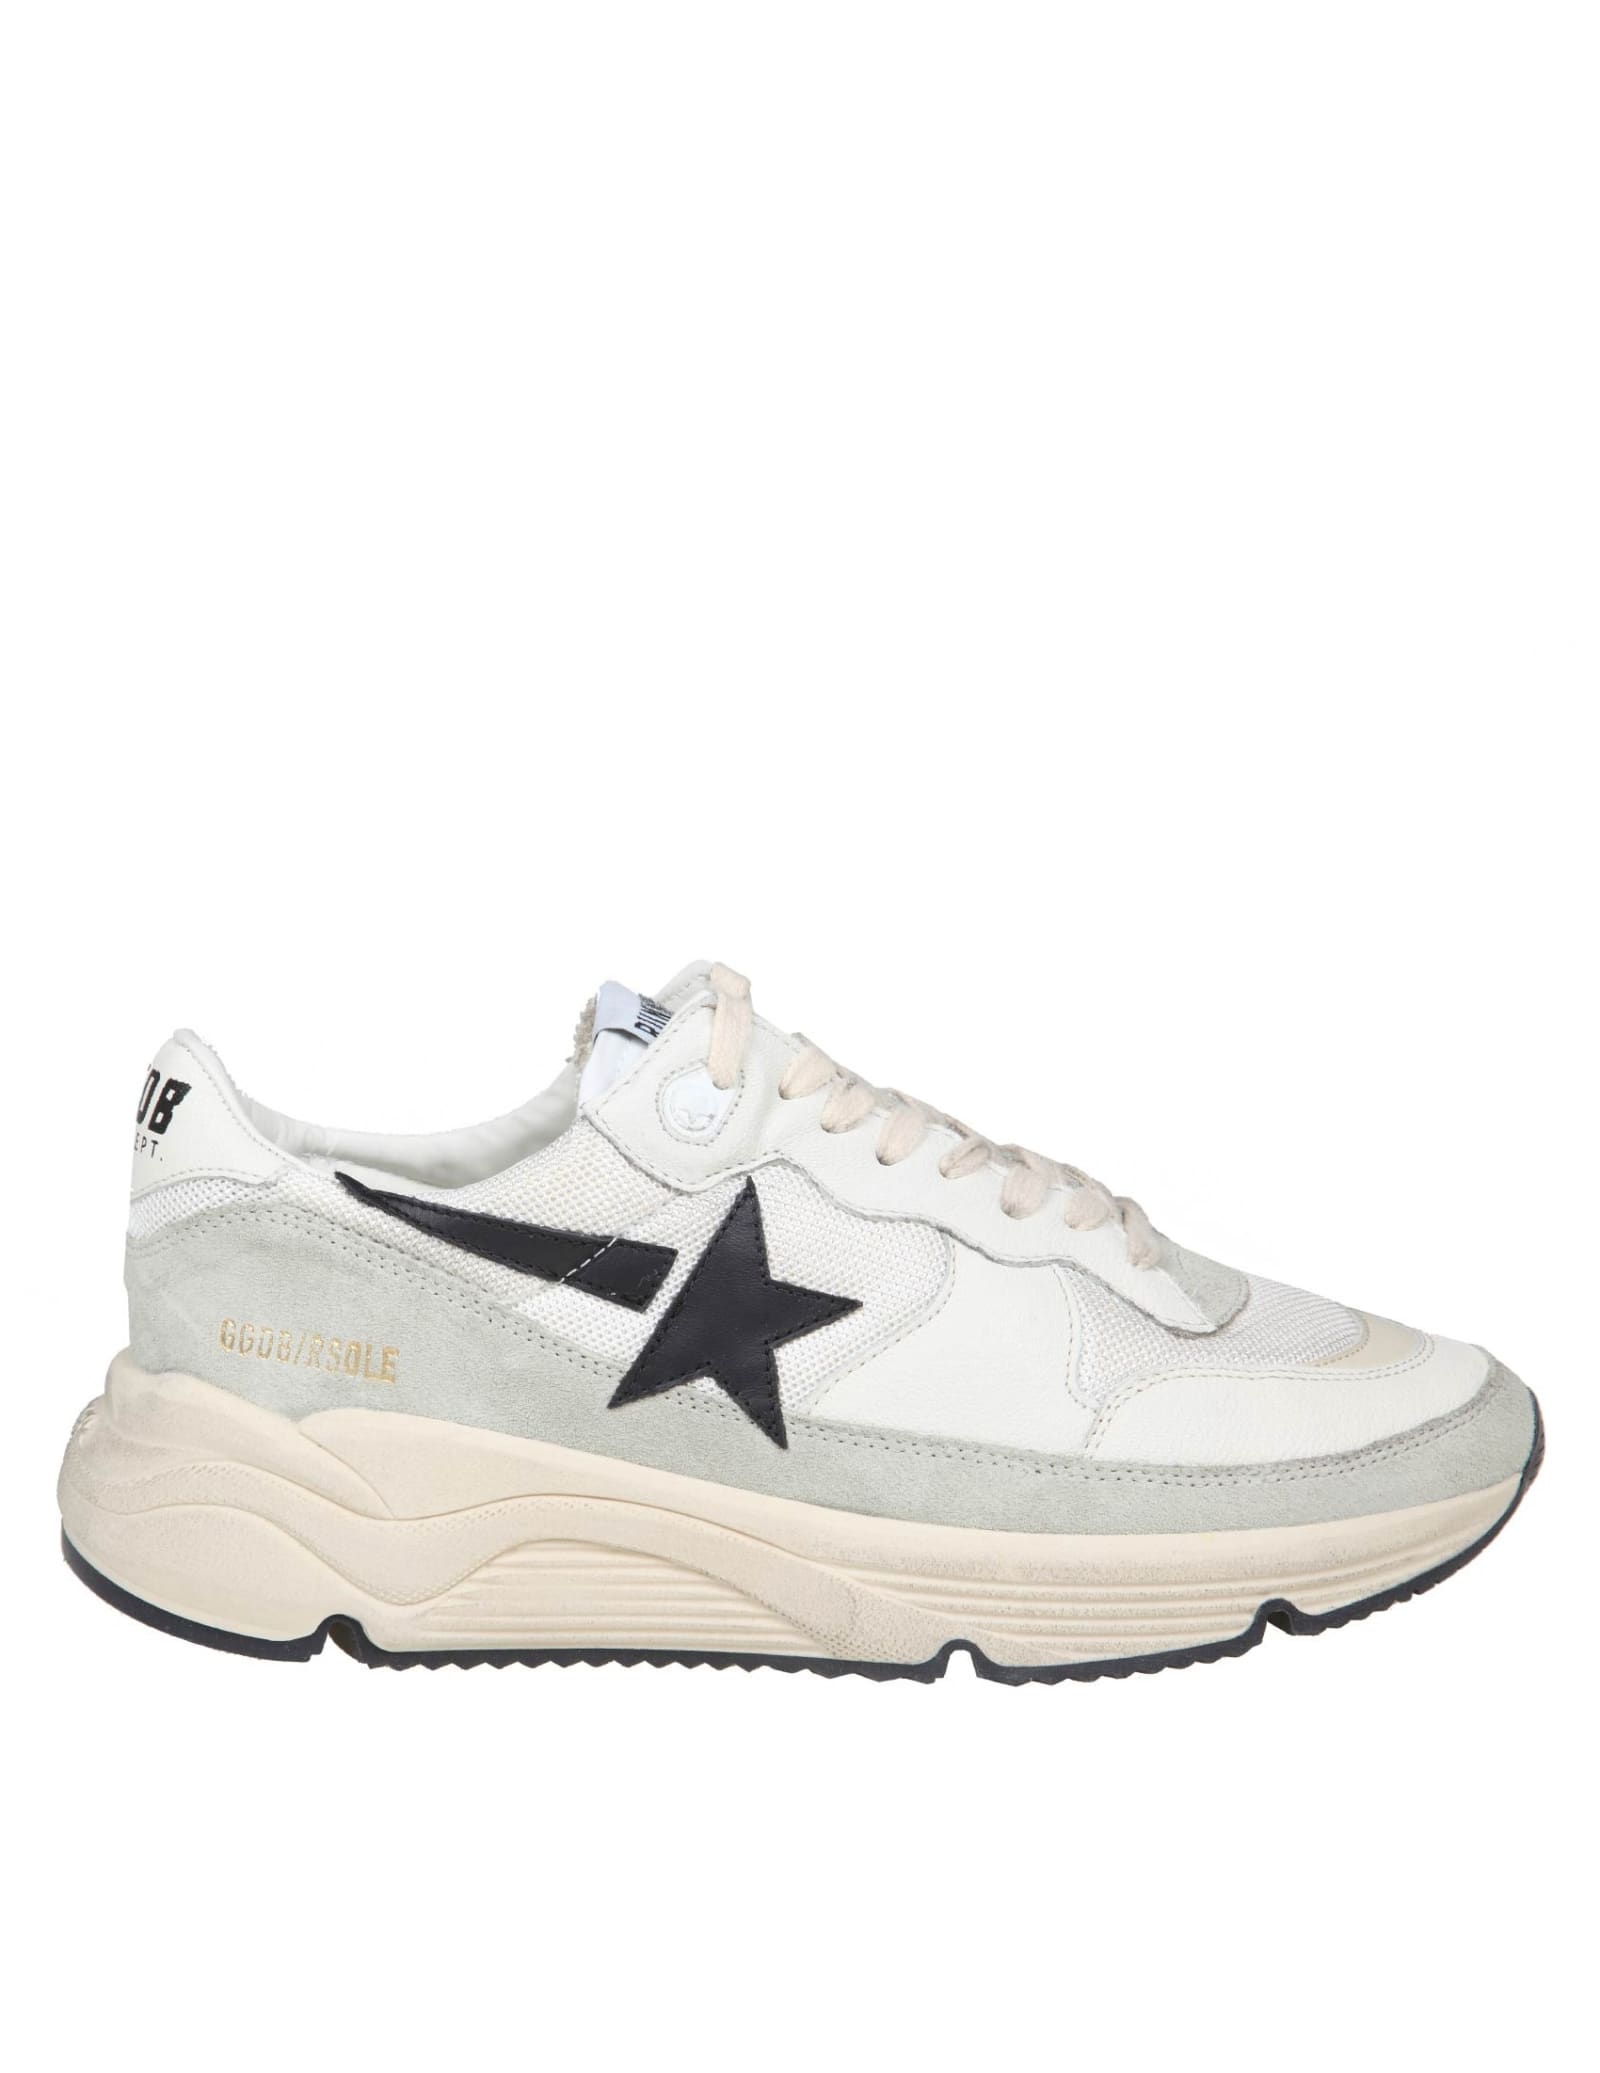 GOLDEN GOOSE GOLDEN GOOSE RUNNING SOLE SNEAKERS IN BLACK AND WHITE LEATHER AND FABRIC